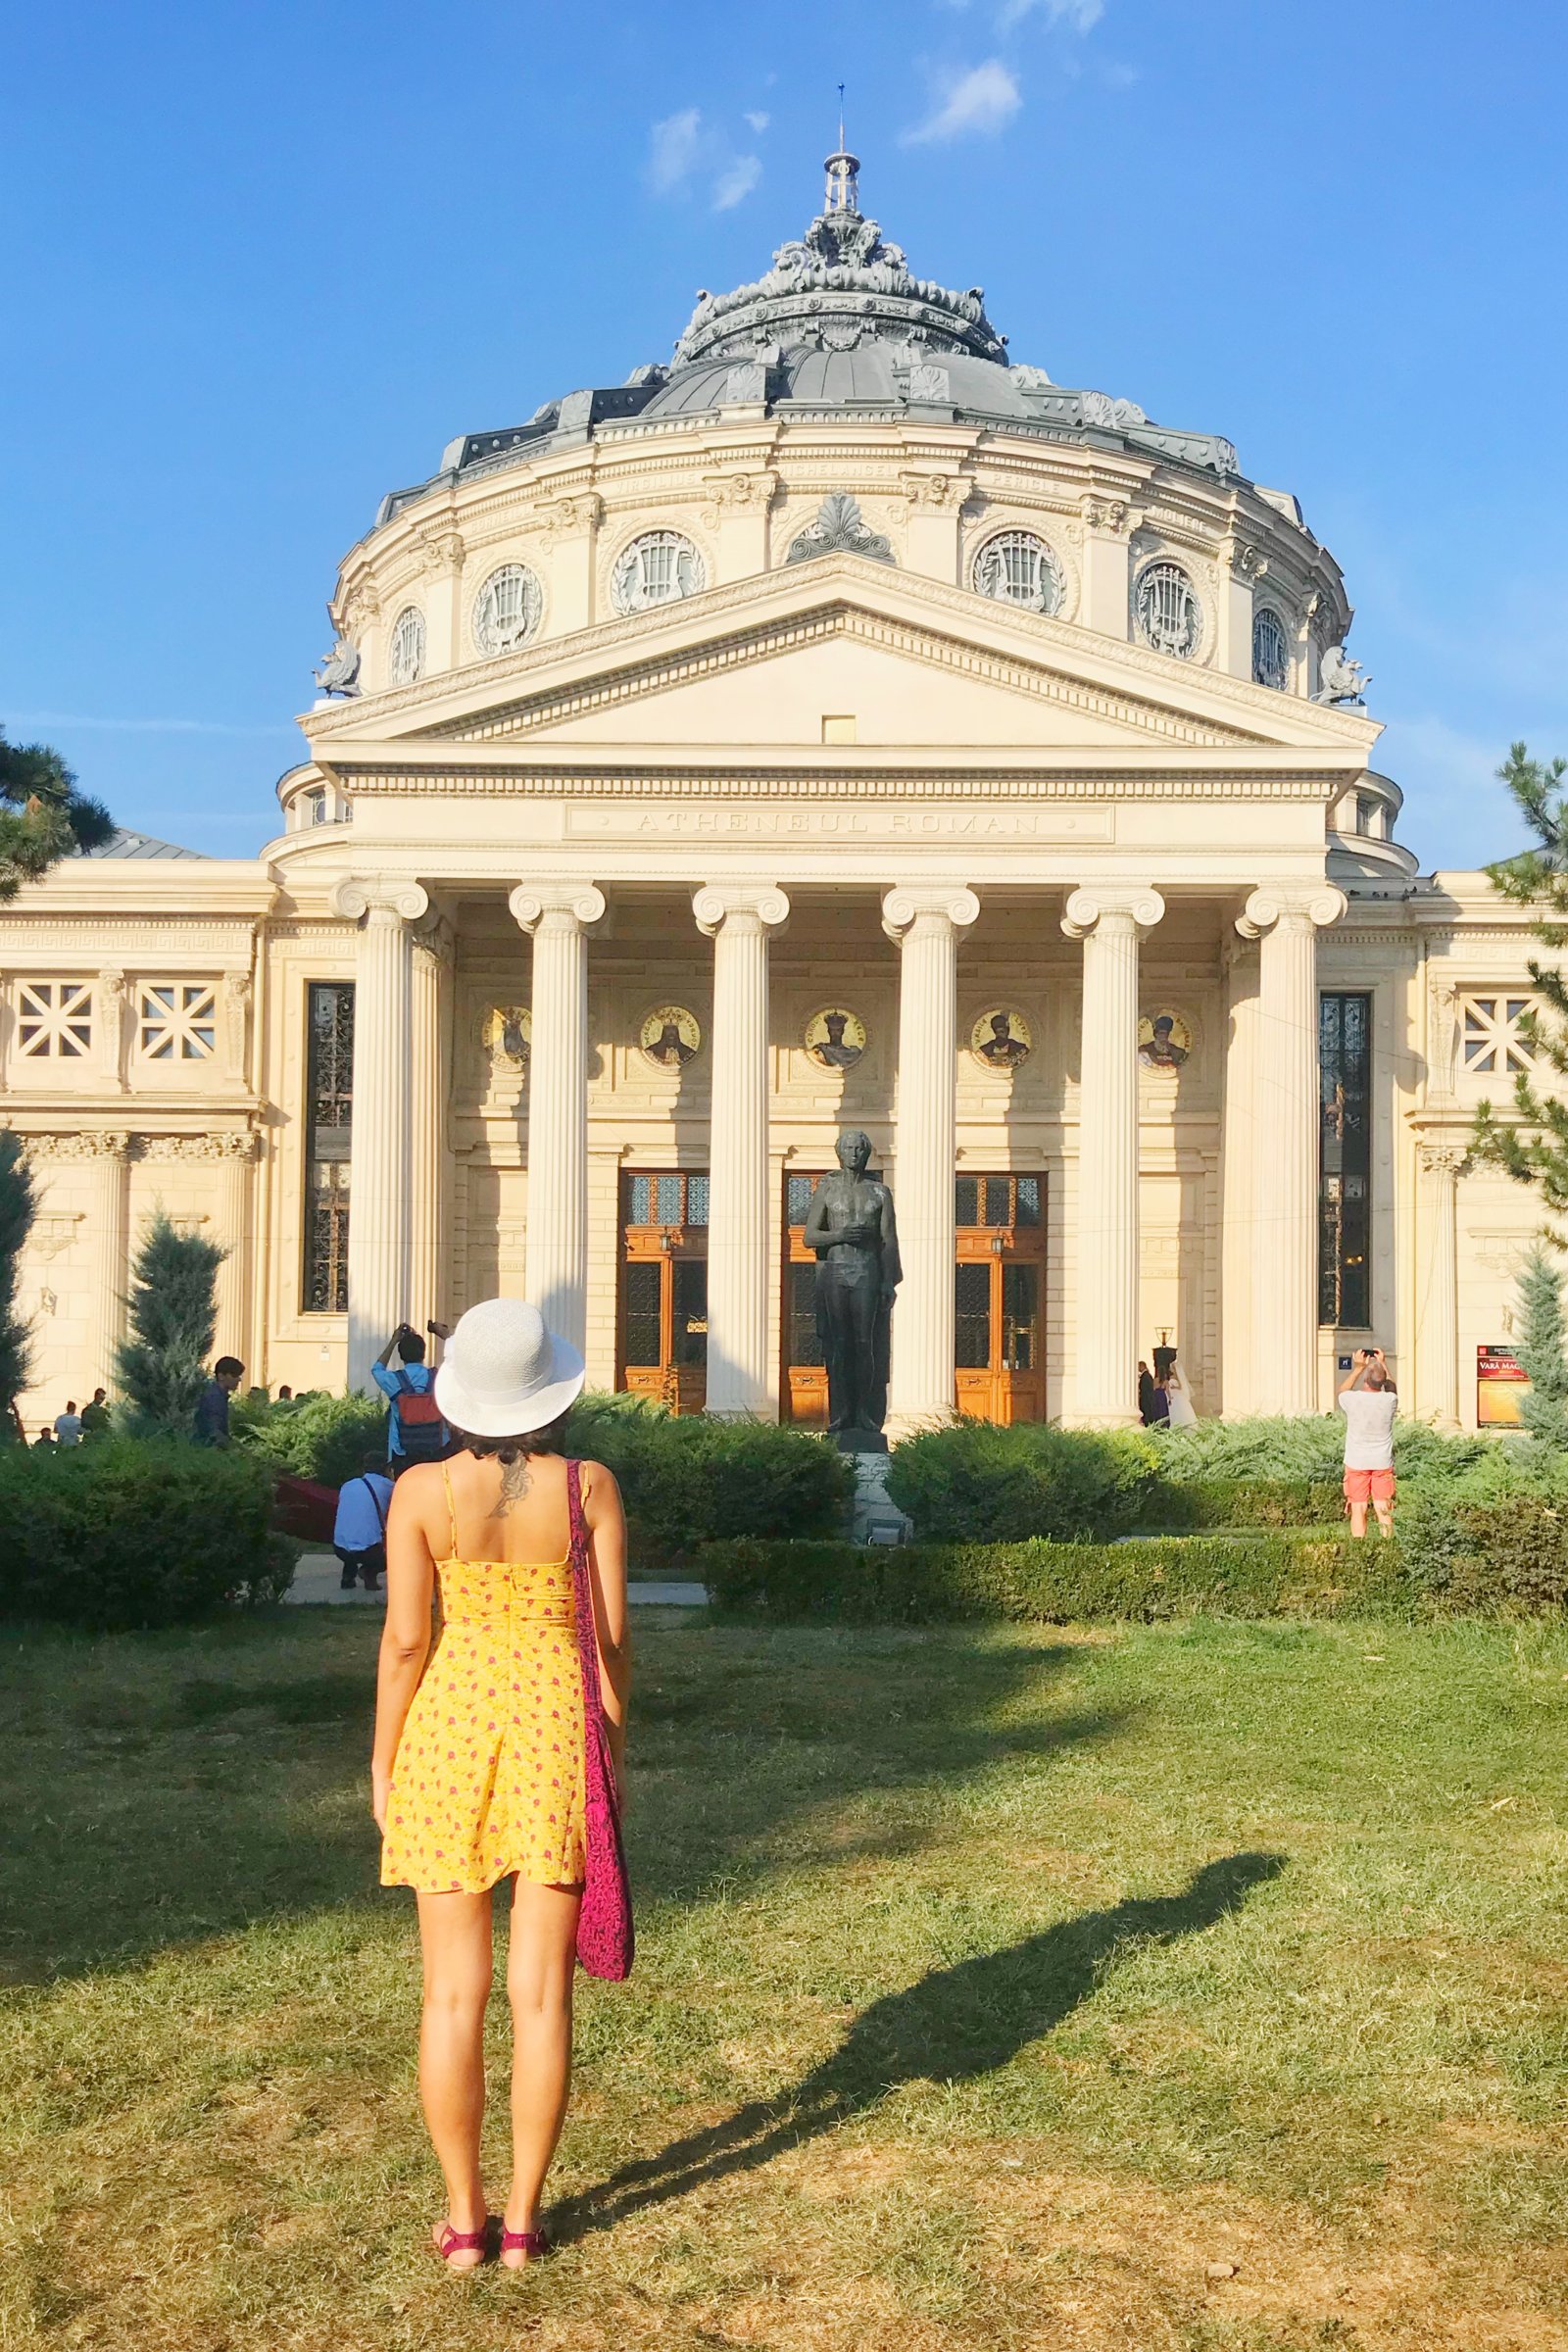 What to do in Bucharest